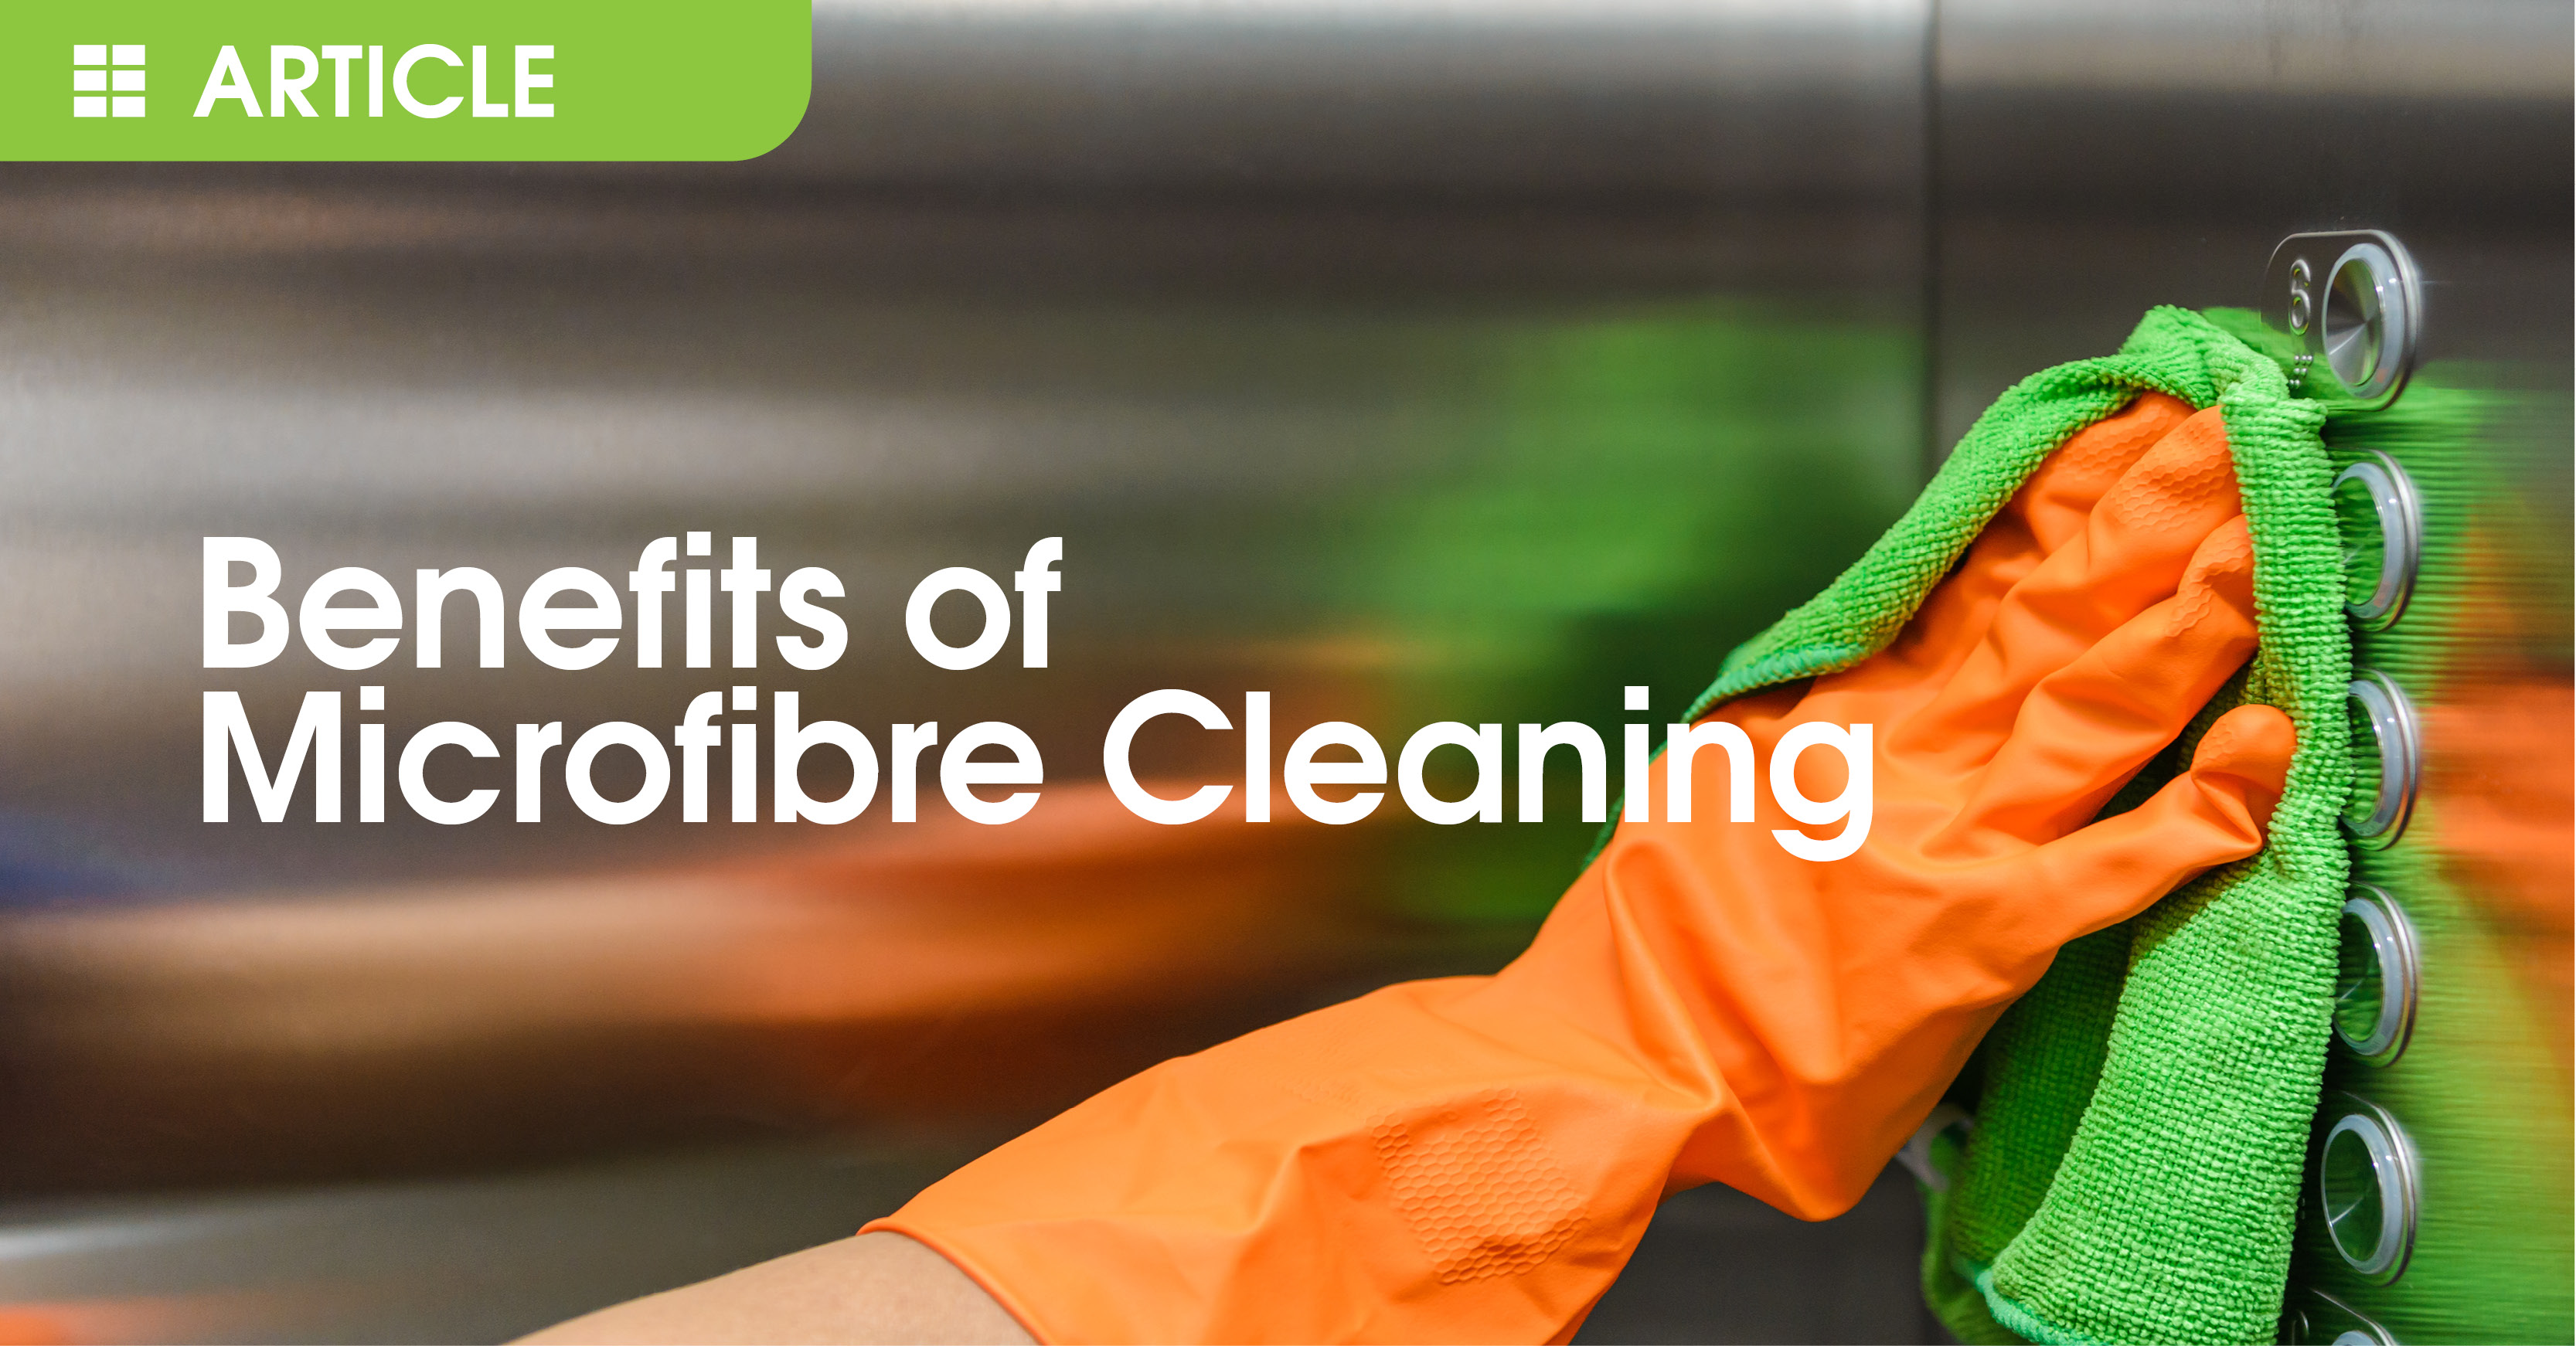 Benefits of Microfibre Cleaning